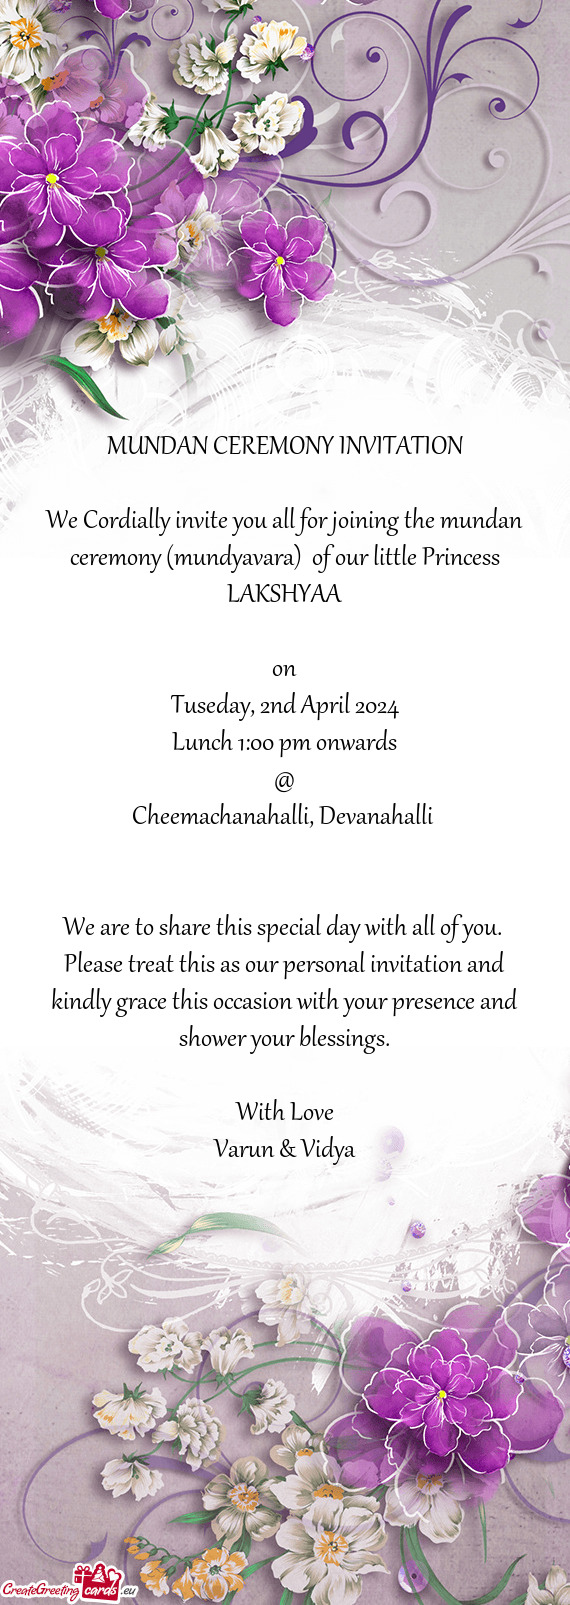 We Cordially invite you all for joining the mundan ceremony (mundyavara) of our little Princess